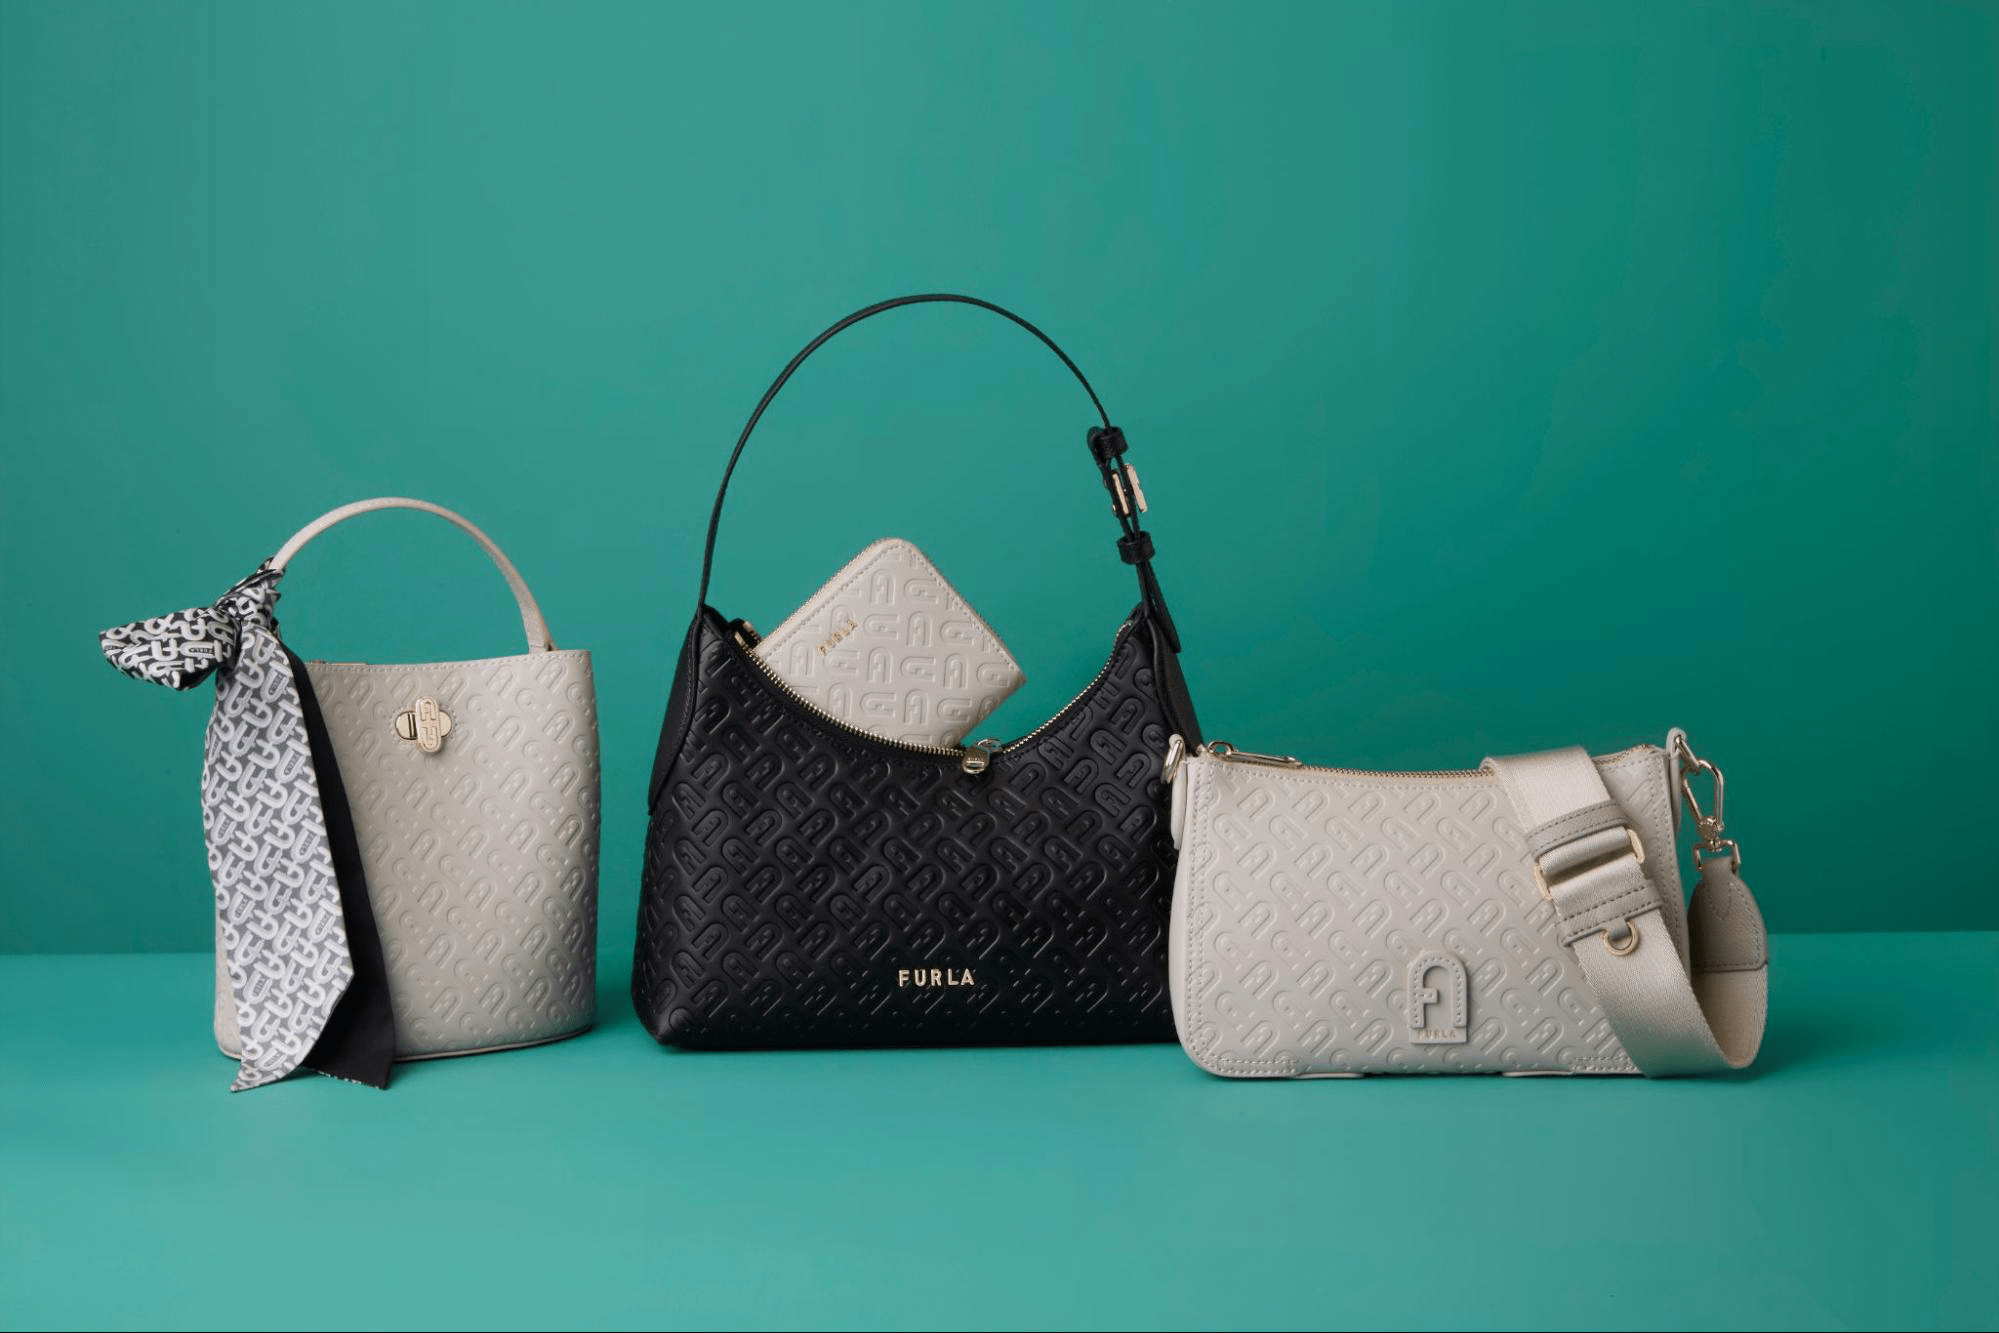 imm and westgate - furla